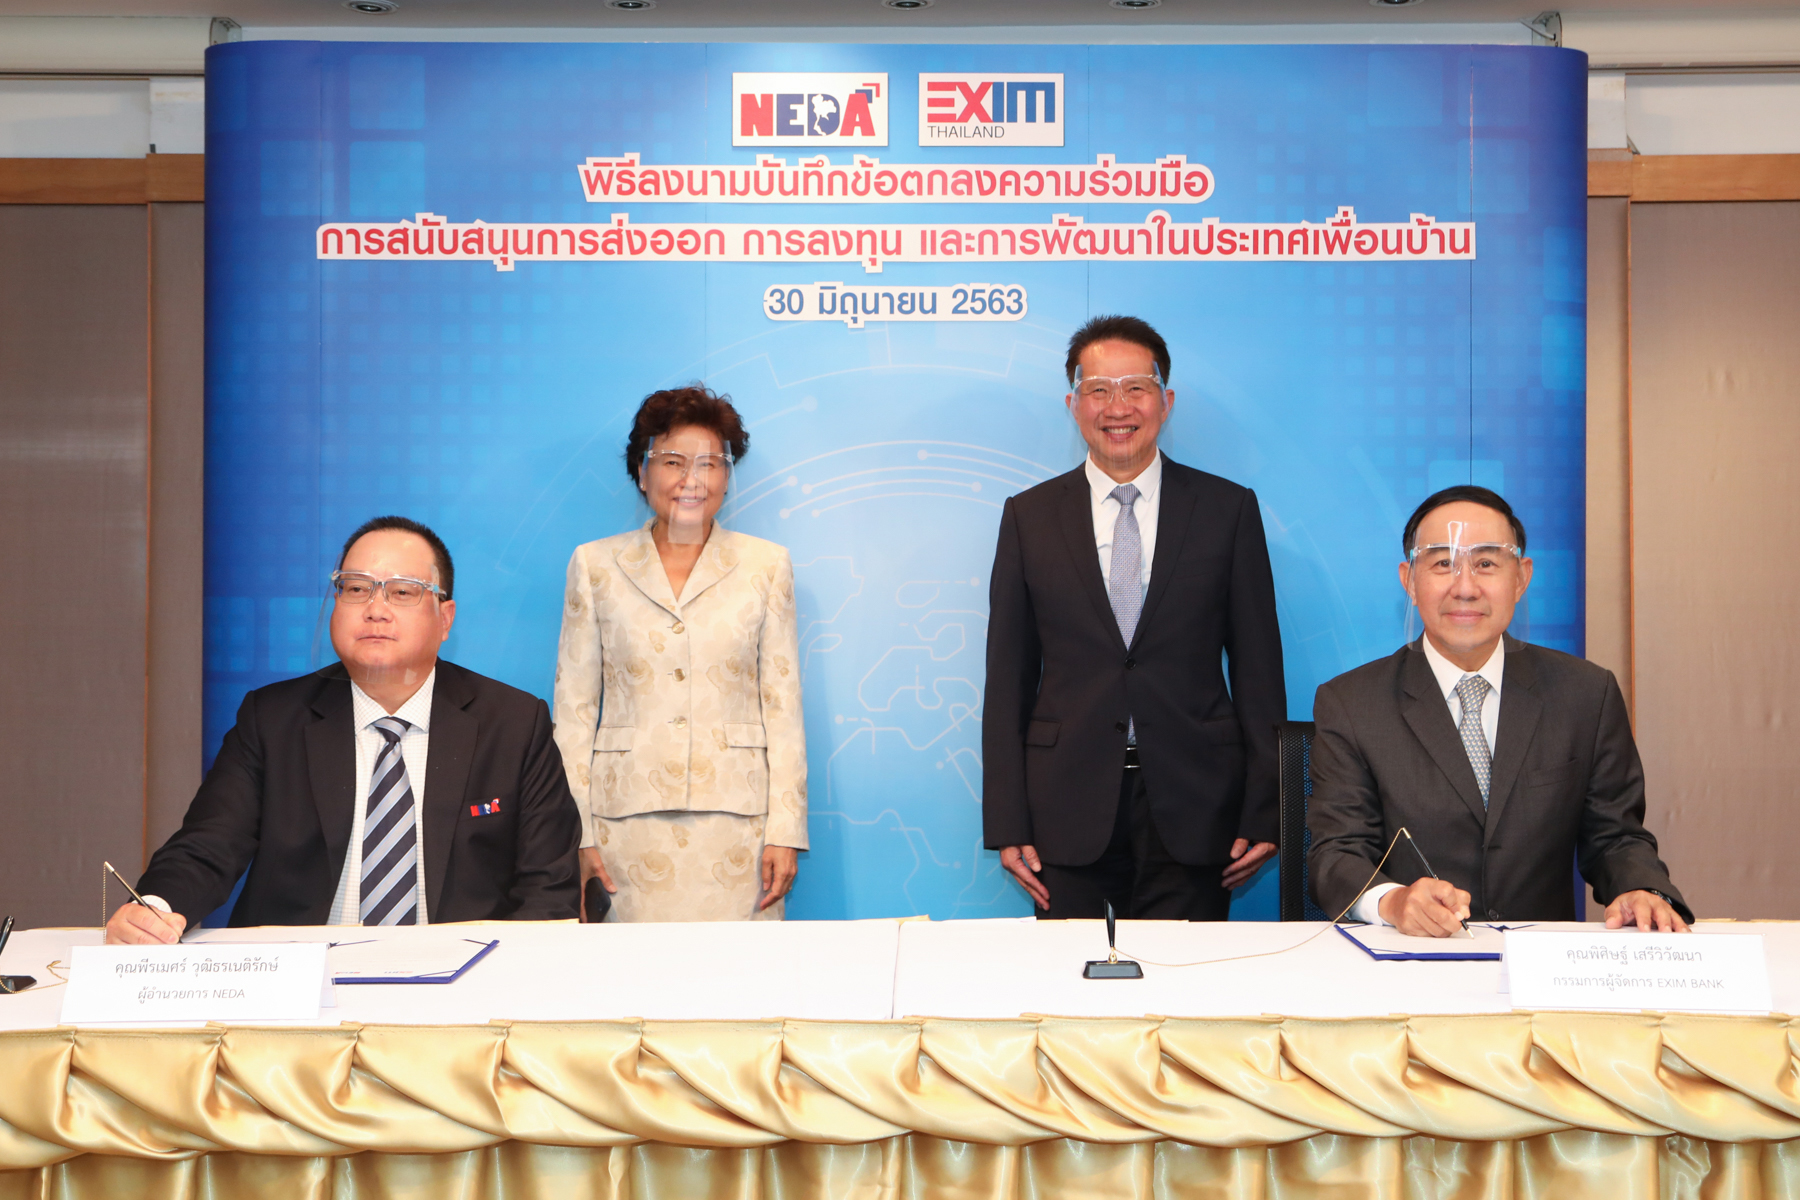 EXIM Thailand Joins Hands with NEDA to Support Thai Entrepreneurs’ Export and Investment for Development of Thailand and Neighboring Countries